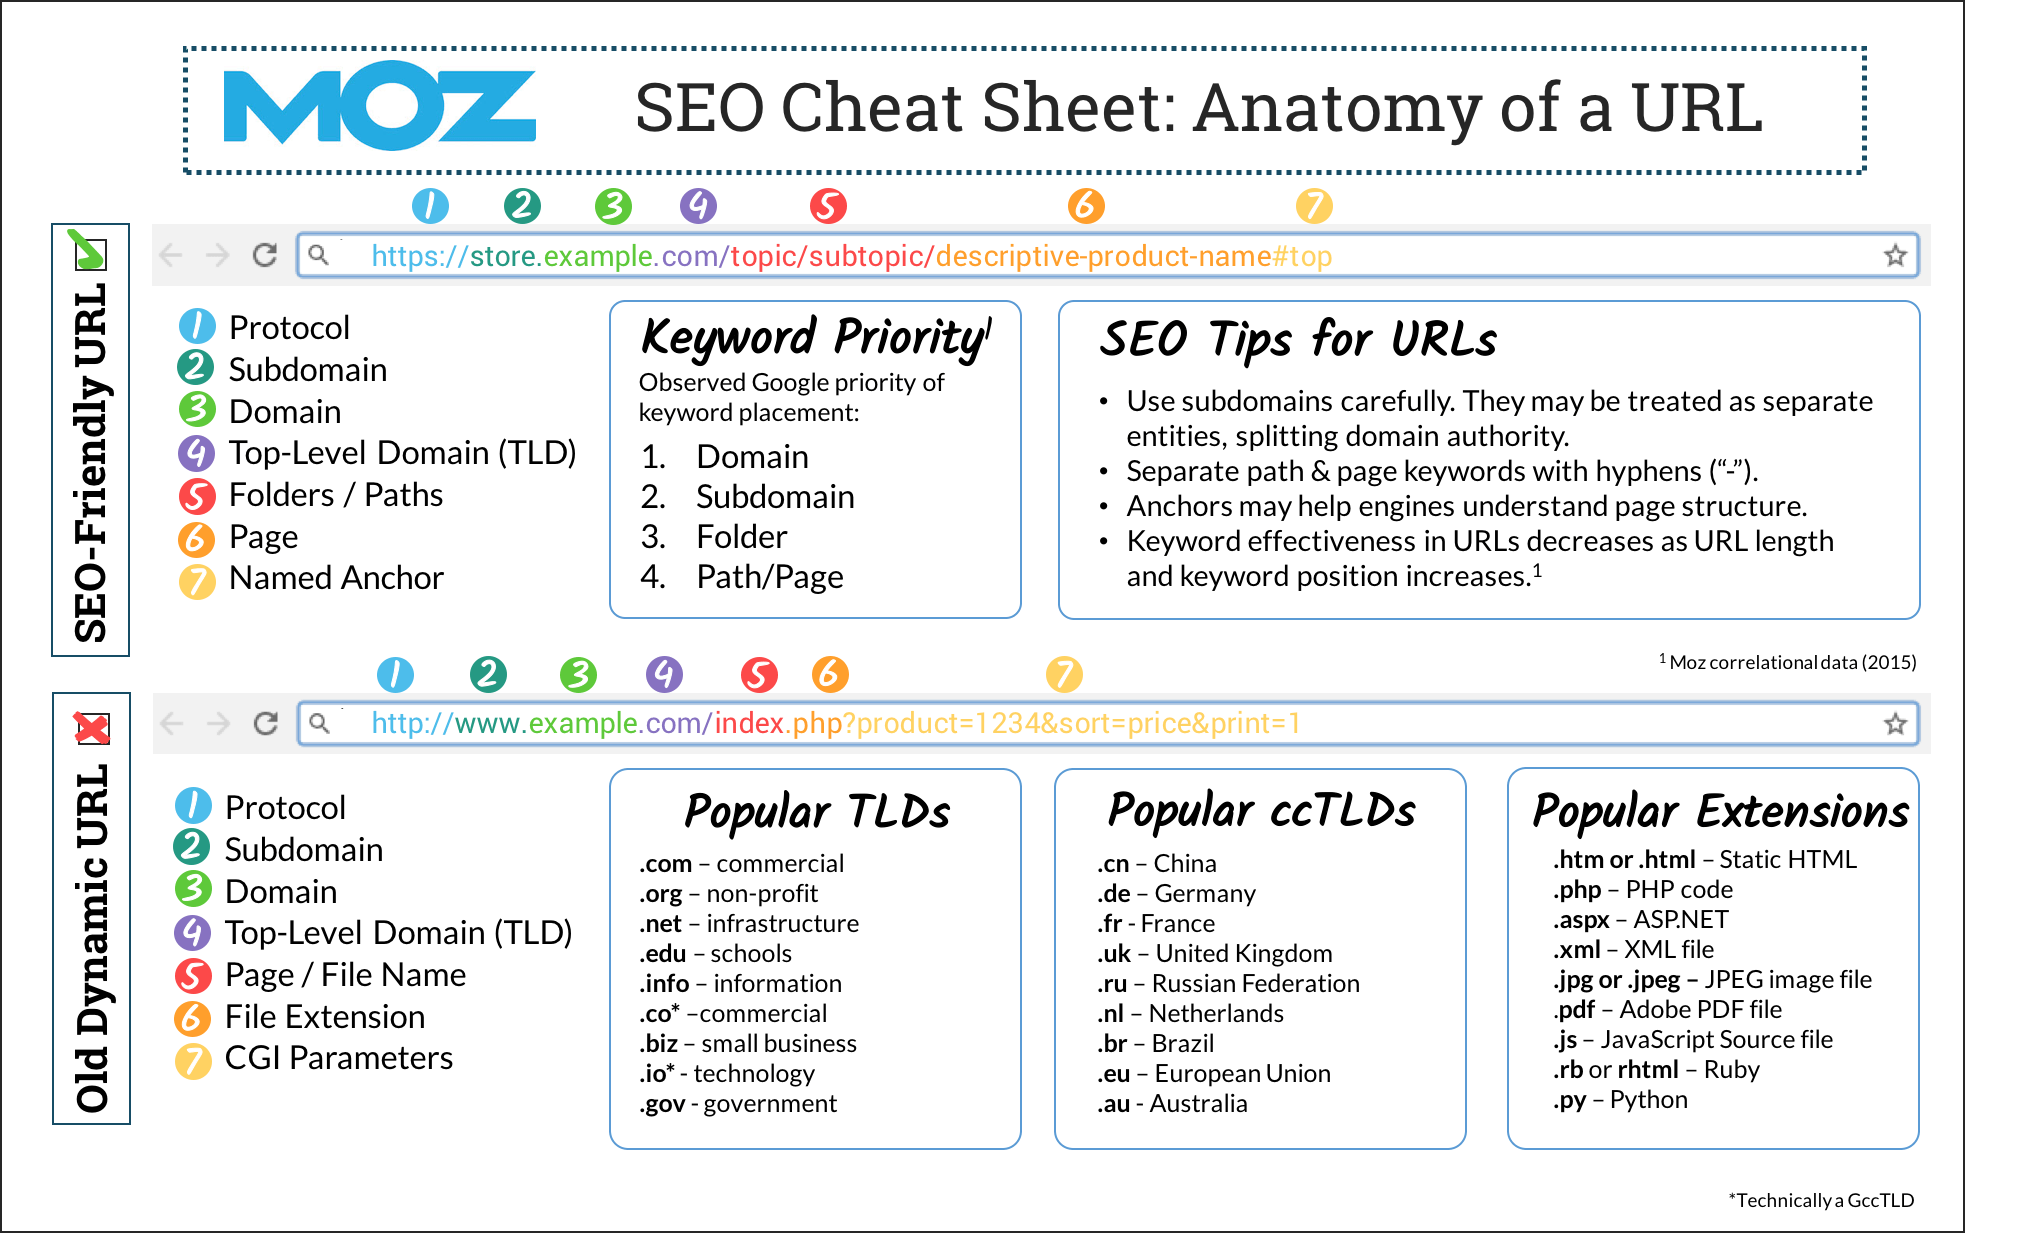 How to use SEO best practices